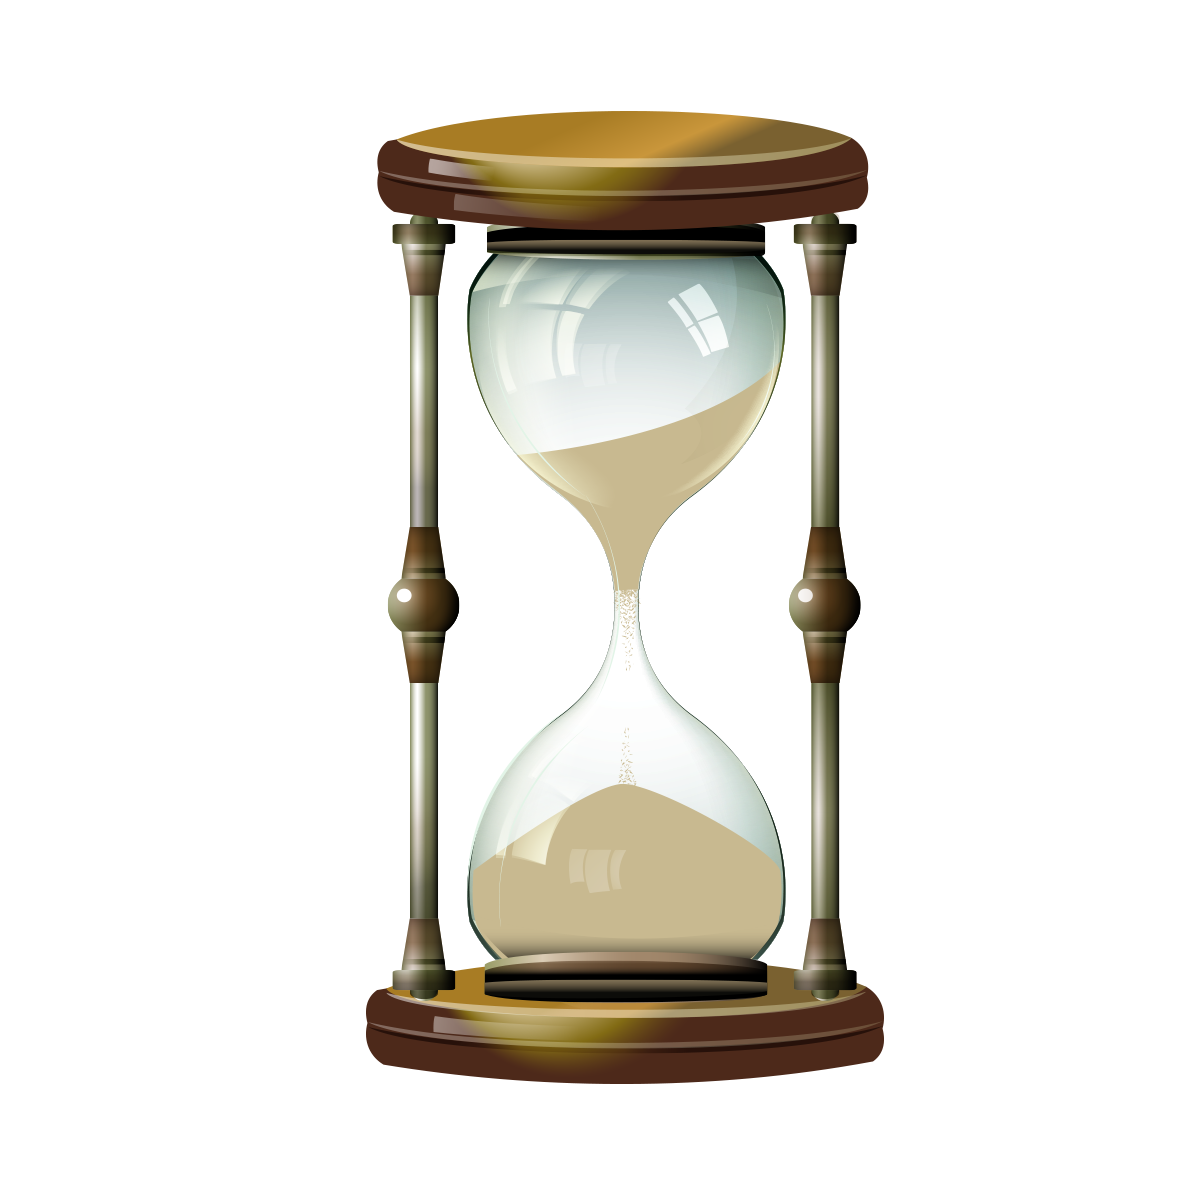 Hourglass Sand Clock PNG Image File